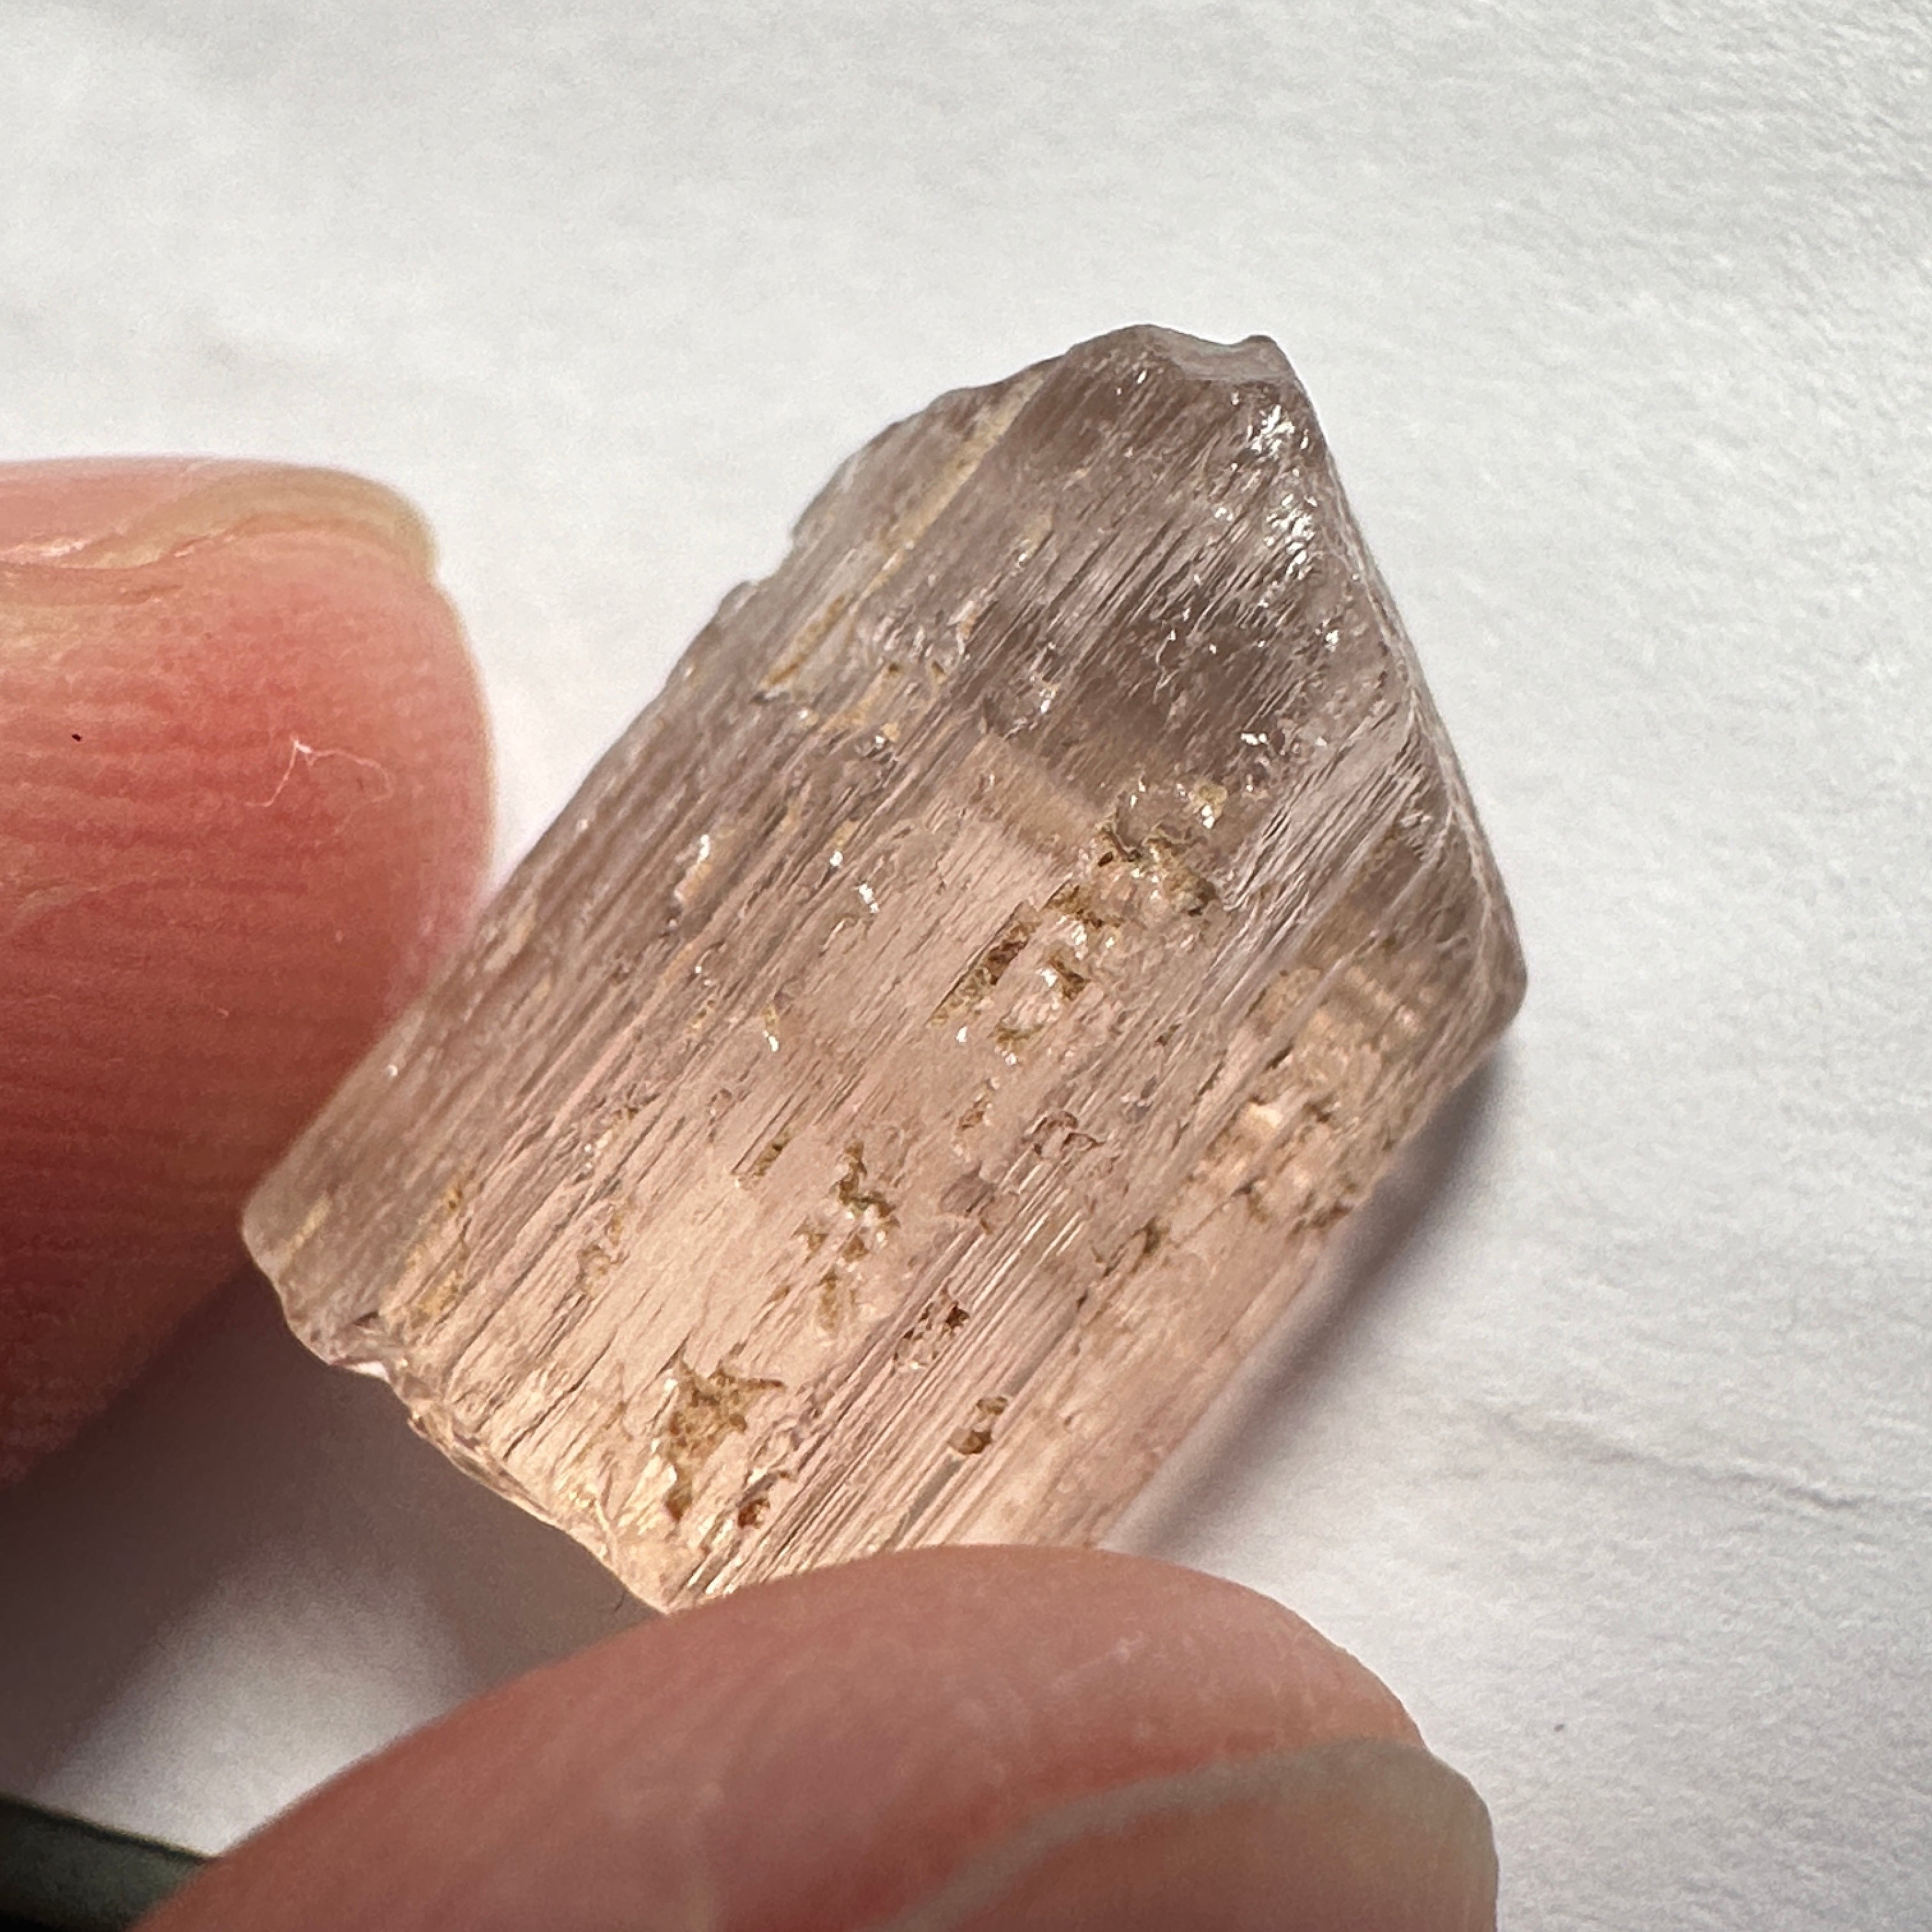 12.14ct Exceptionally Rare Peach Pink Scapolite Crystal, Tanzania, Untreated Unheated, vvs-if (Flawless)